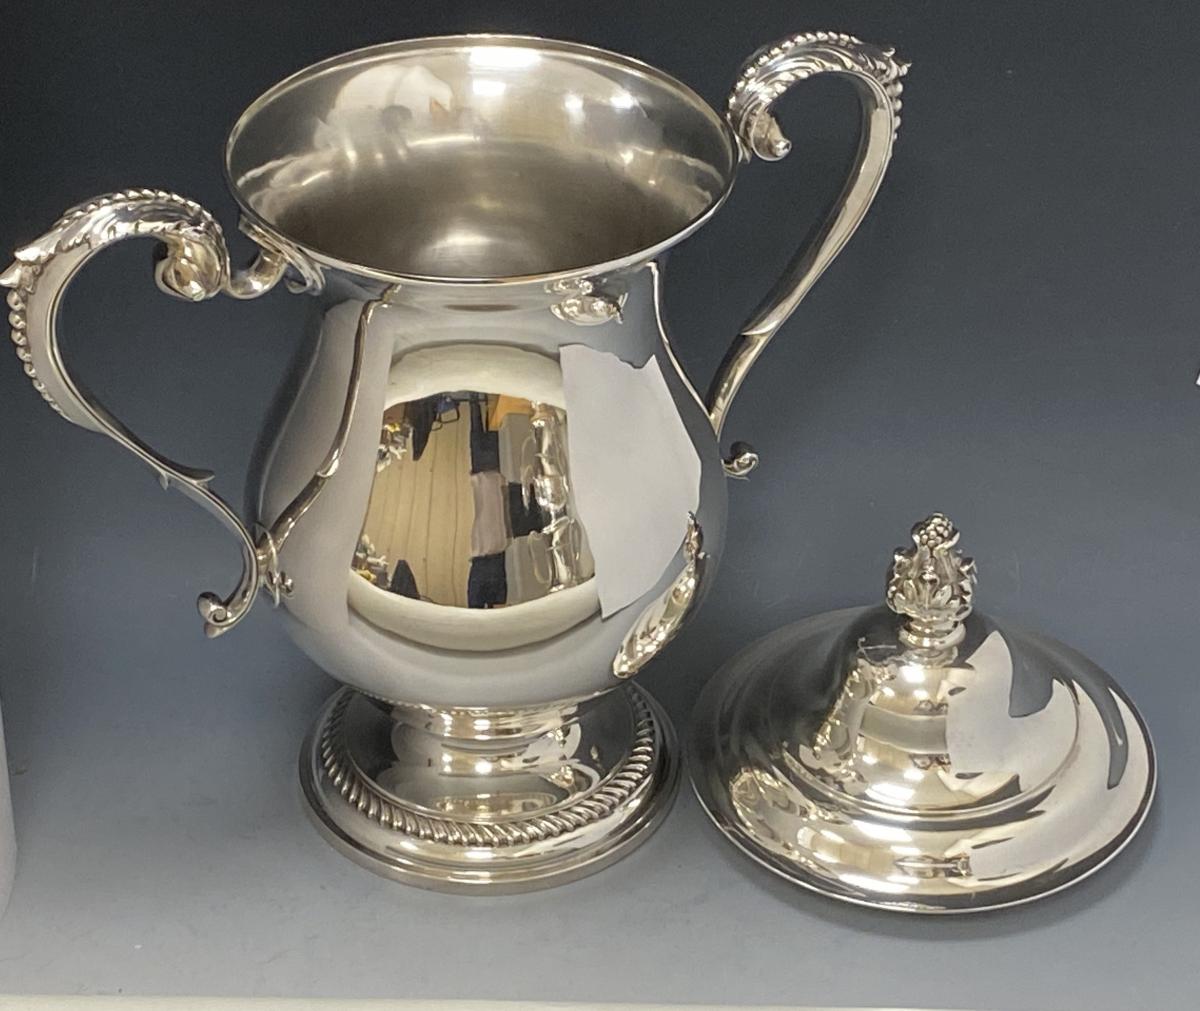 Goldsmiths and Silversmiths sterling silver cup and cover trophy 1910